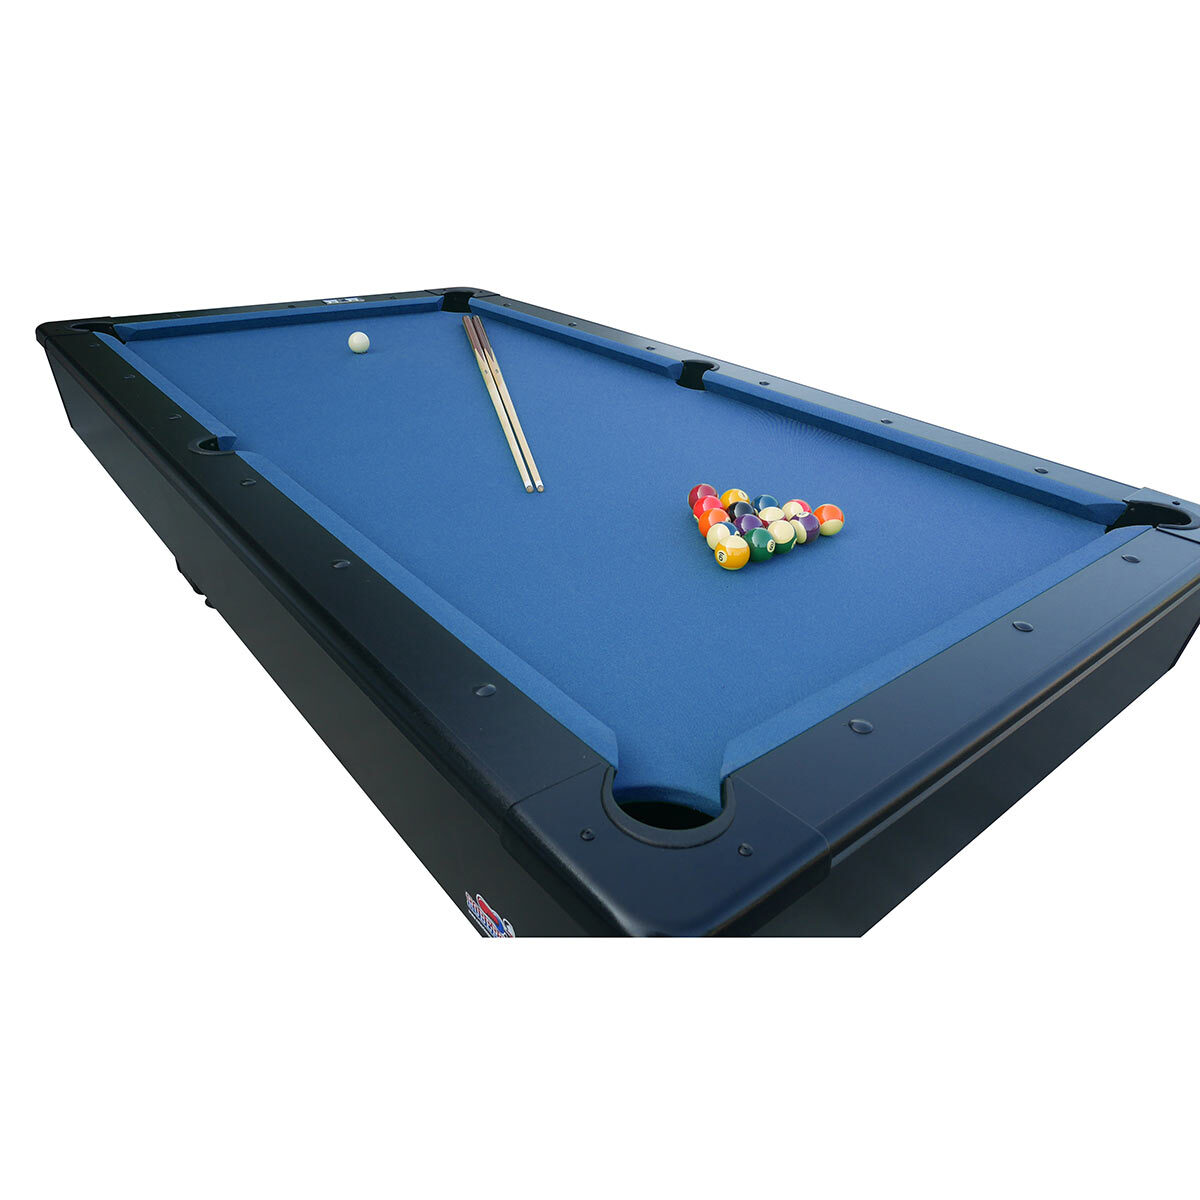 Installed Roberto Sport 6ft First Slate Pool Table